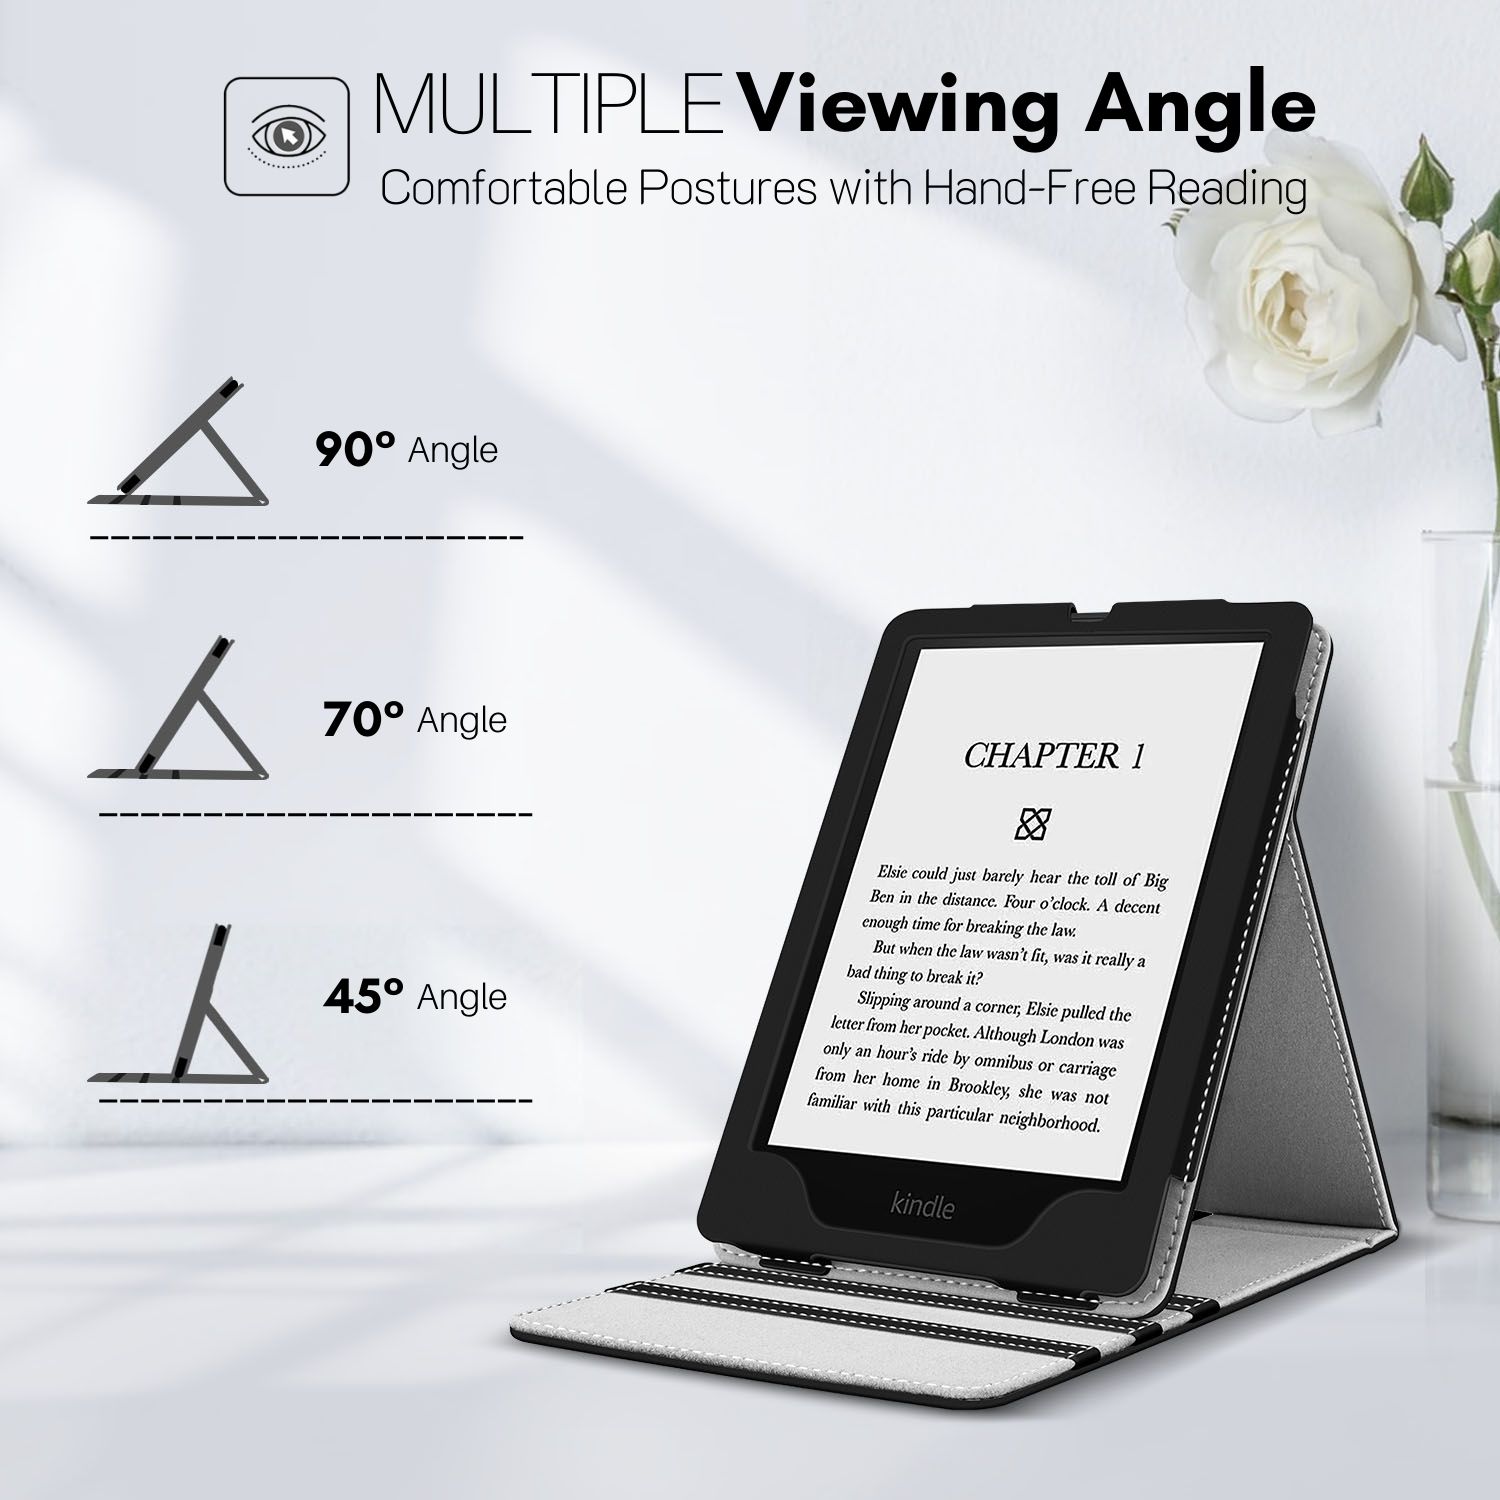 Vertical Flip Stand Design - Makes reading more convenient and provides three adjustable standing heights. The vertical orientation/flip makes it so you can read it hands free sitting at a table, in bed, and anywhere without straining your neck